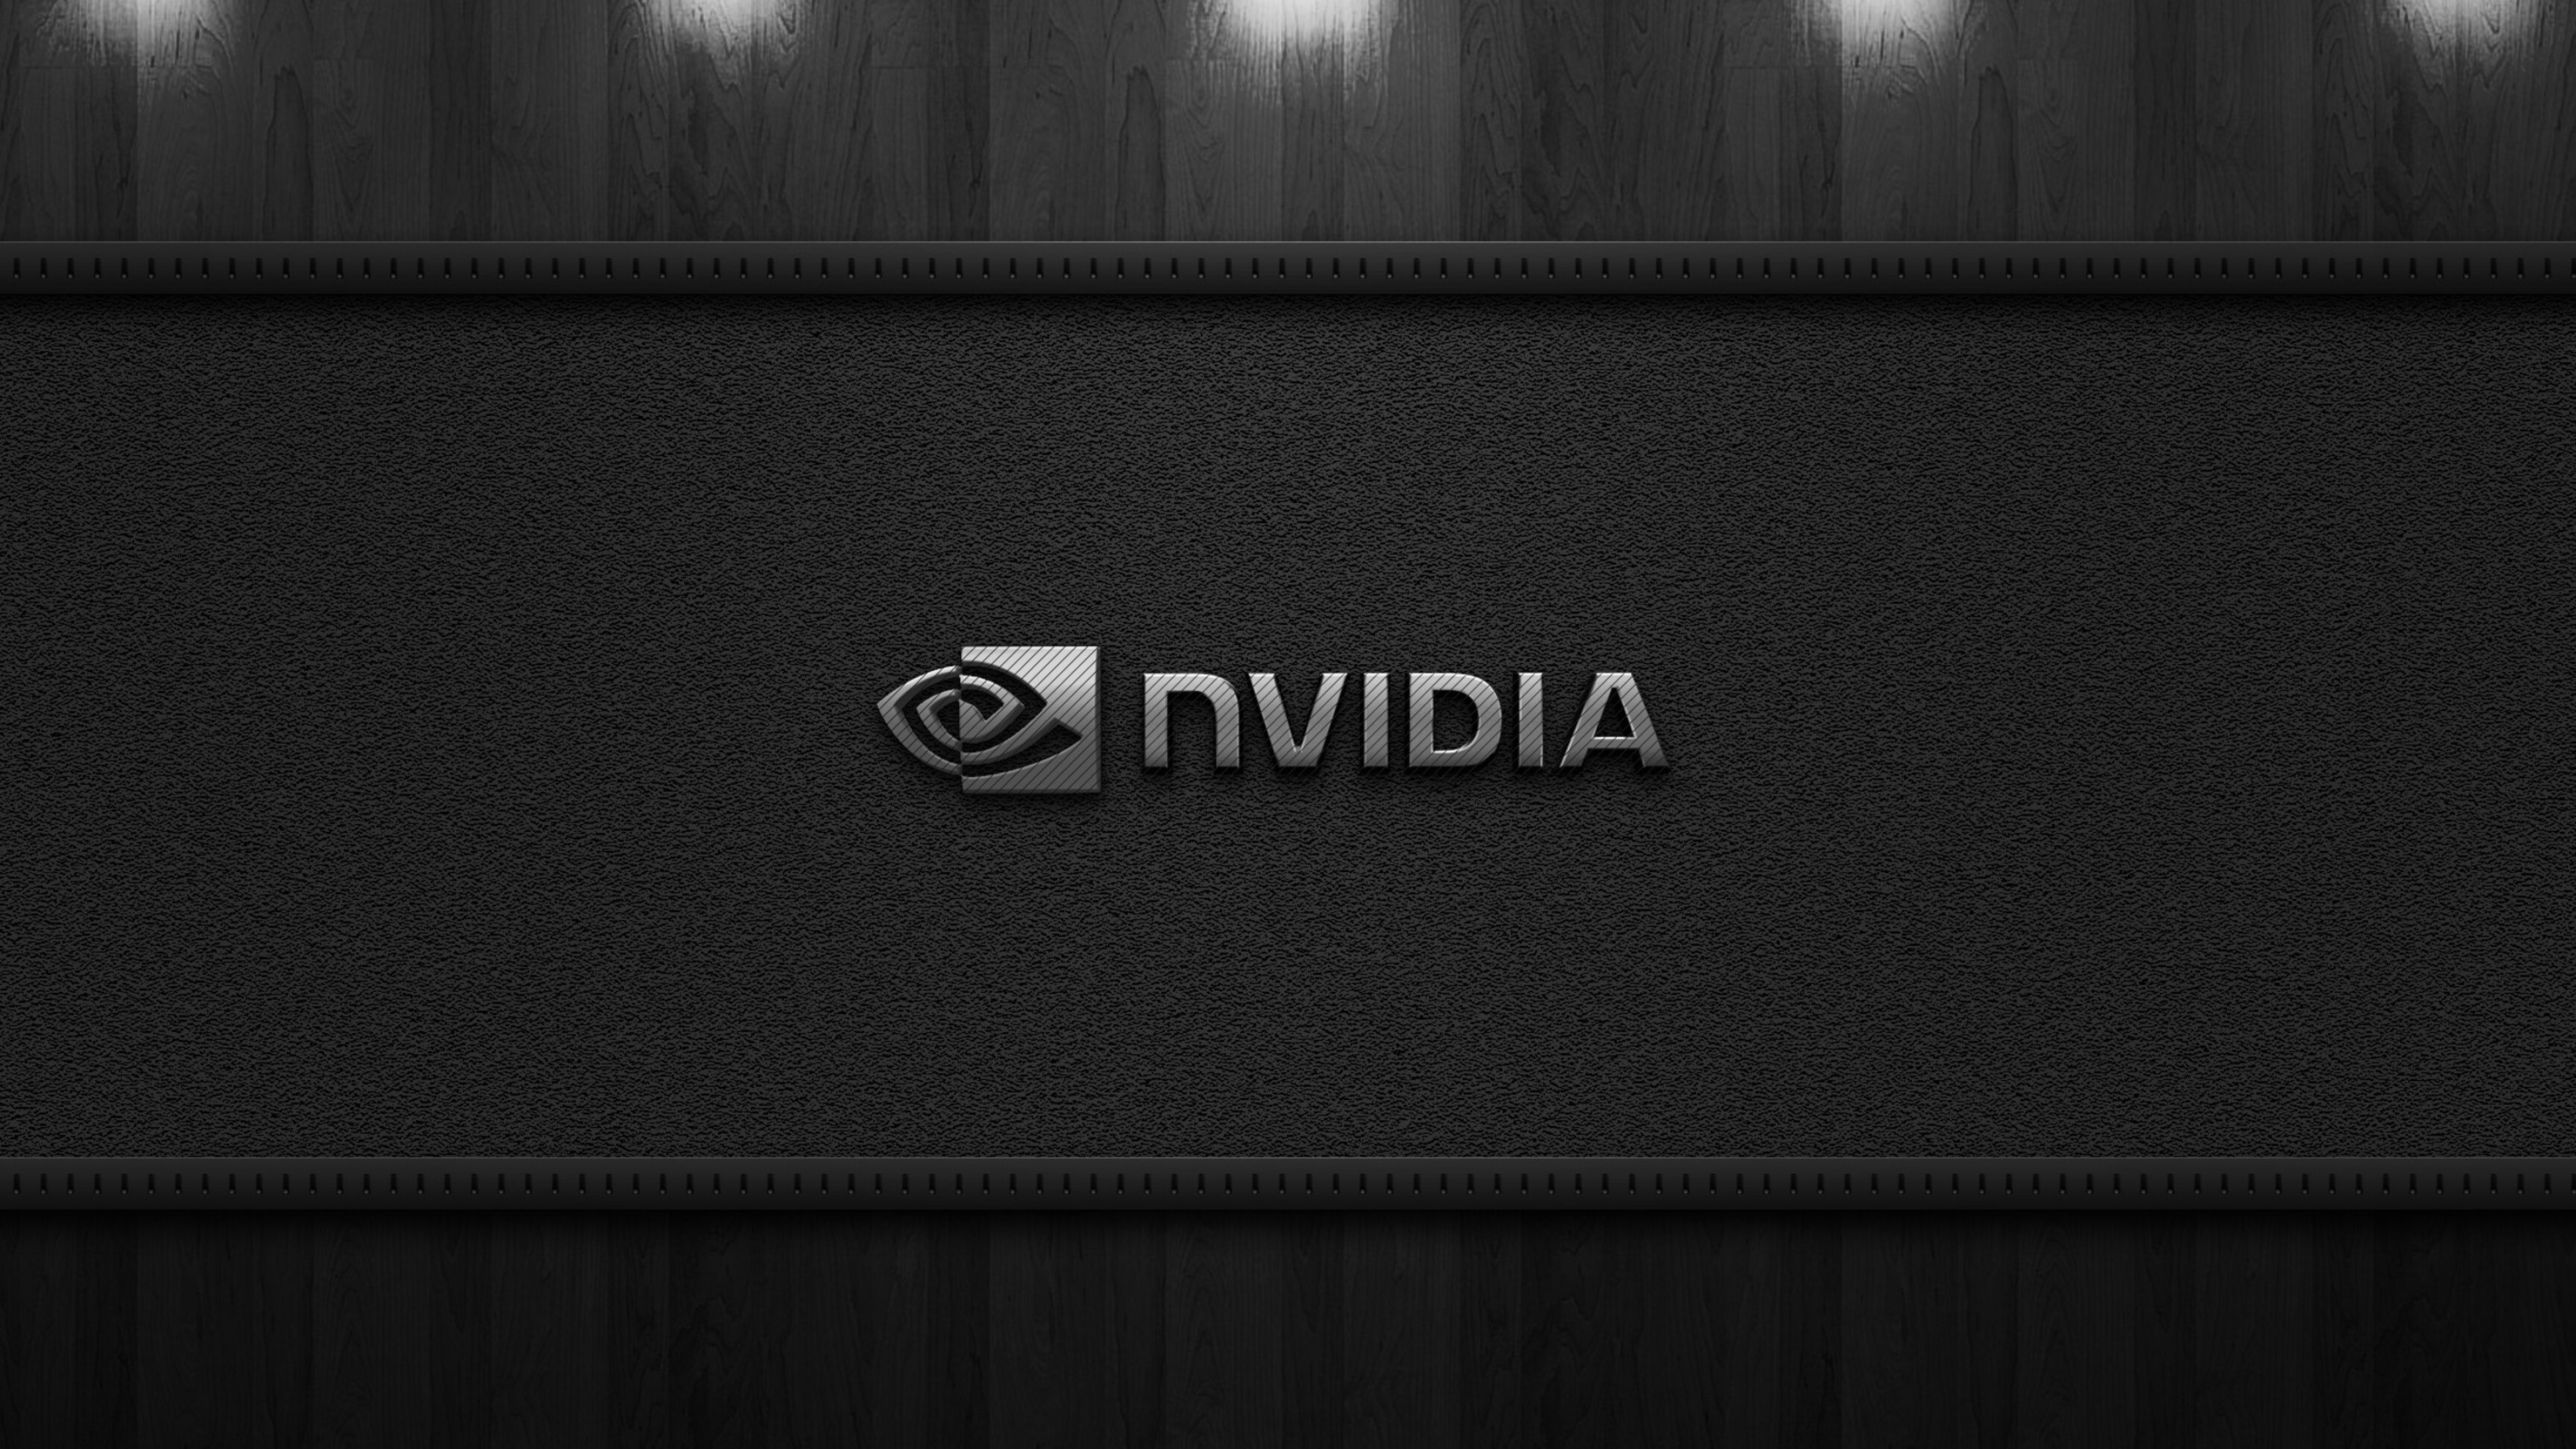 Nvidia: A collaboration deal with Toyota in May 2017, Drive PX-range artificial intelligence system. 3840x2160 4K Background.